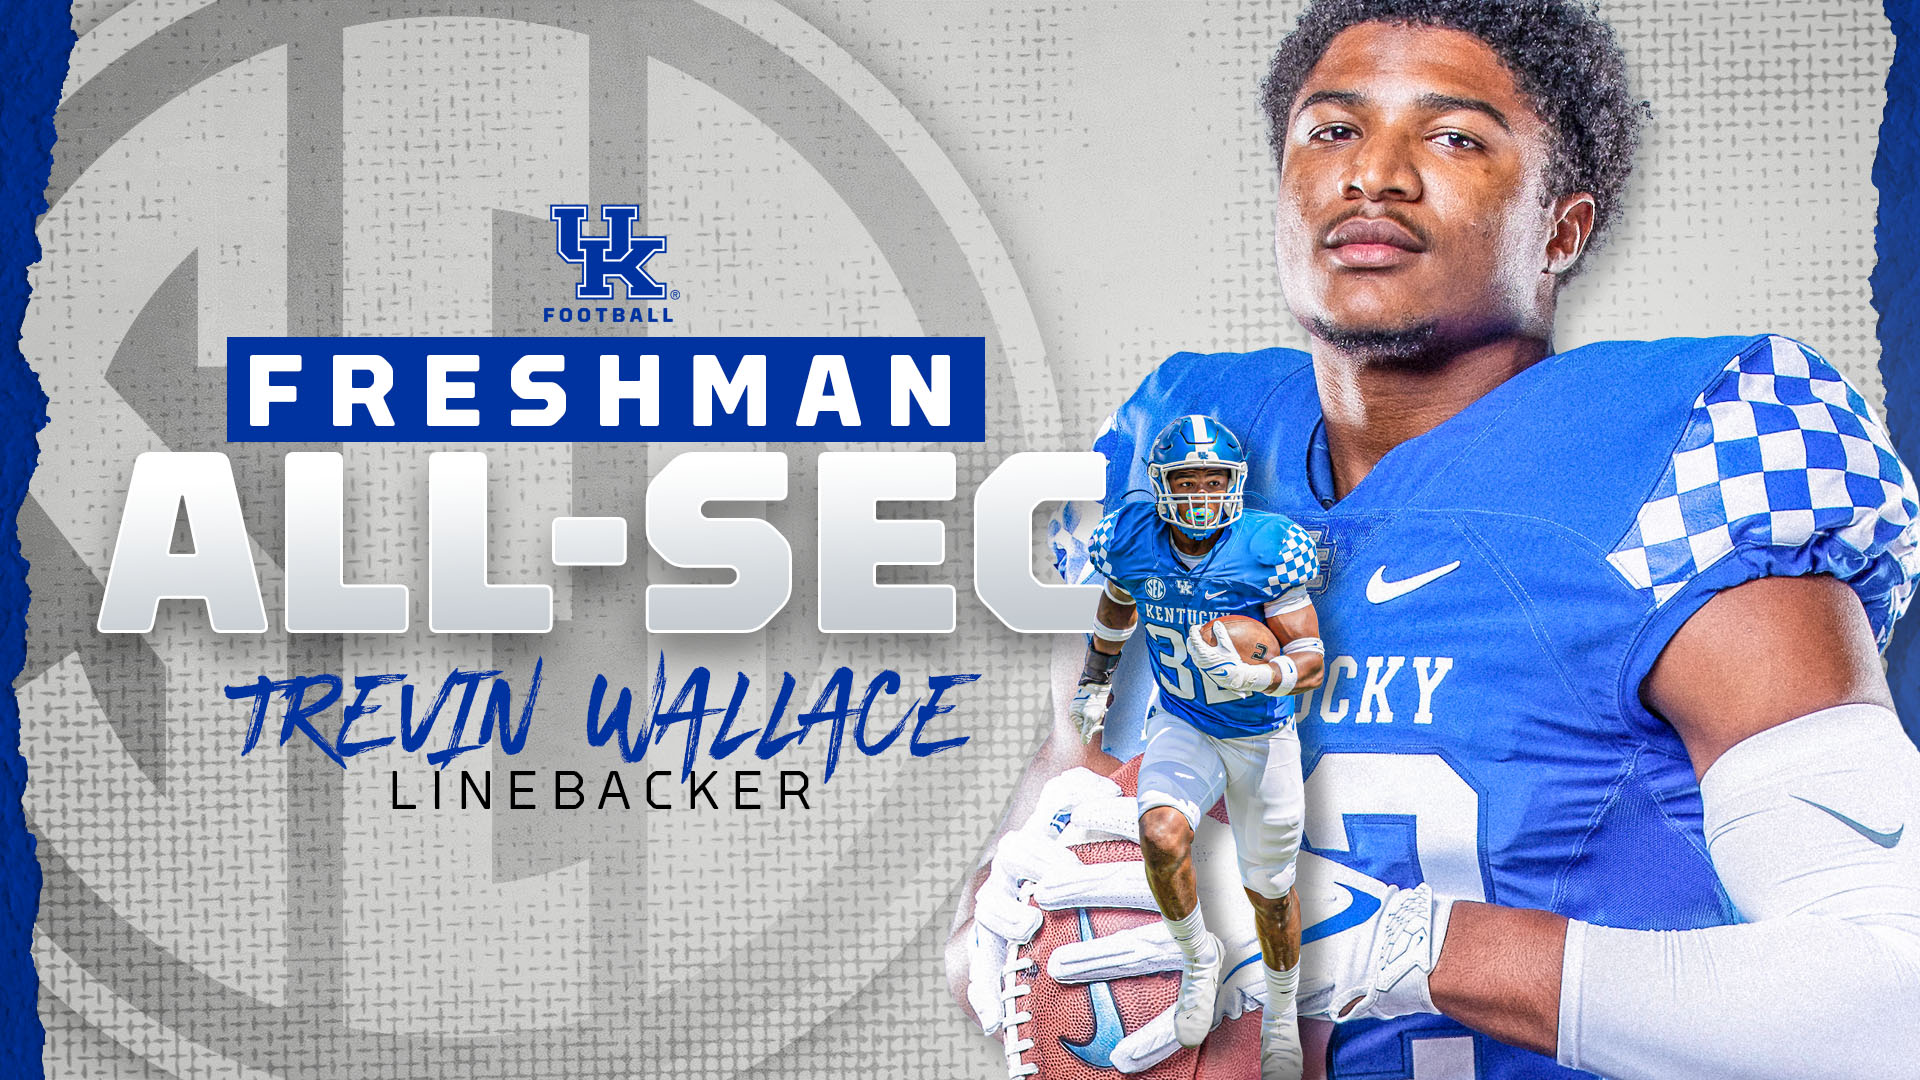 Trevin Wallace Named to SEC All-Freshman Team